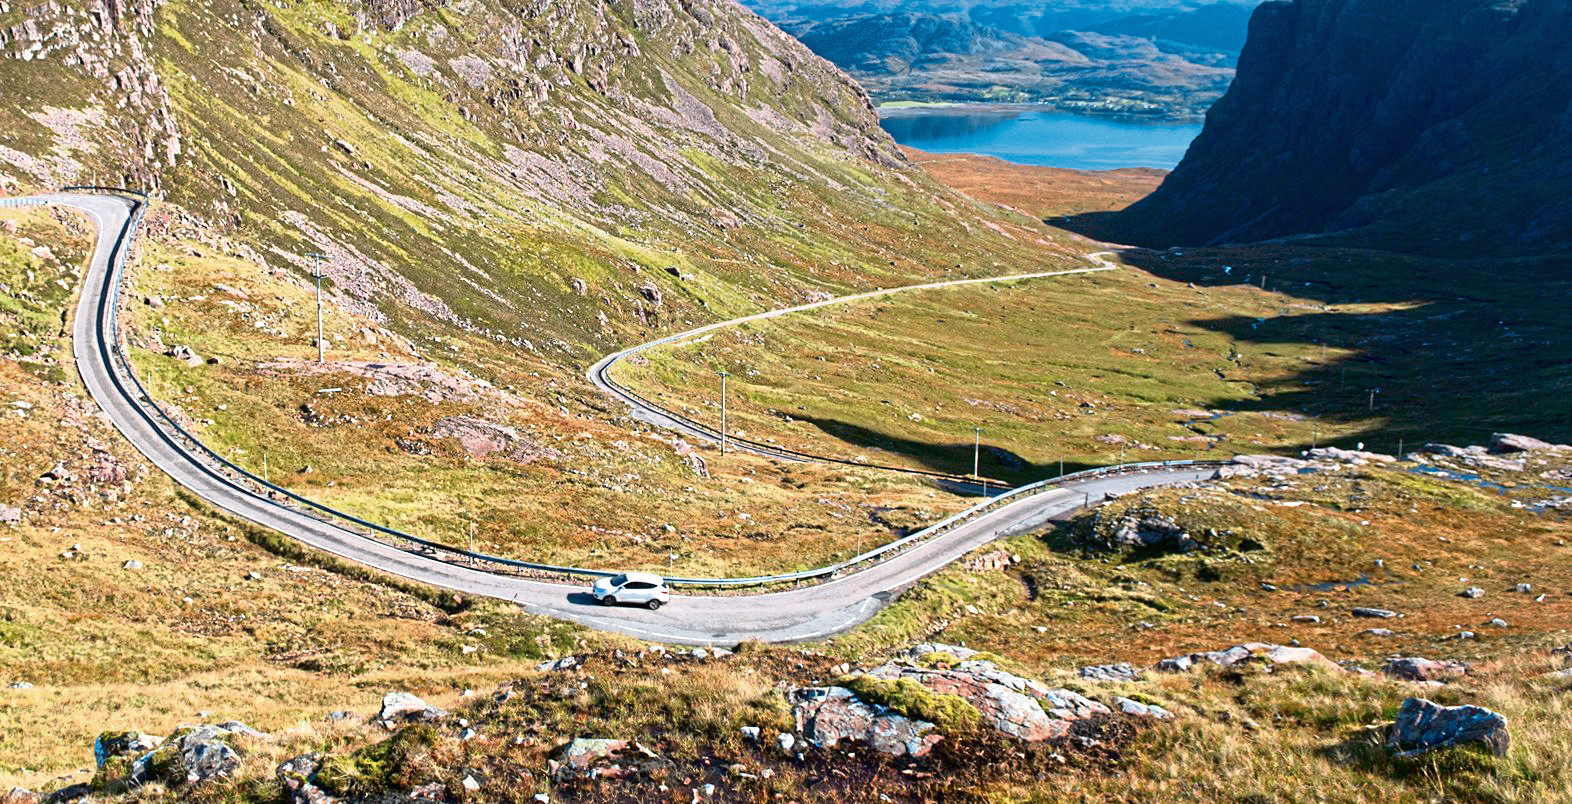 Bealach na ba (pass of the cattle) on the Applecross Peninsula, which is part of the North Coast 500 (NC500).